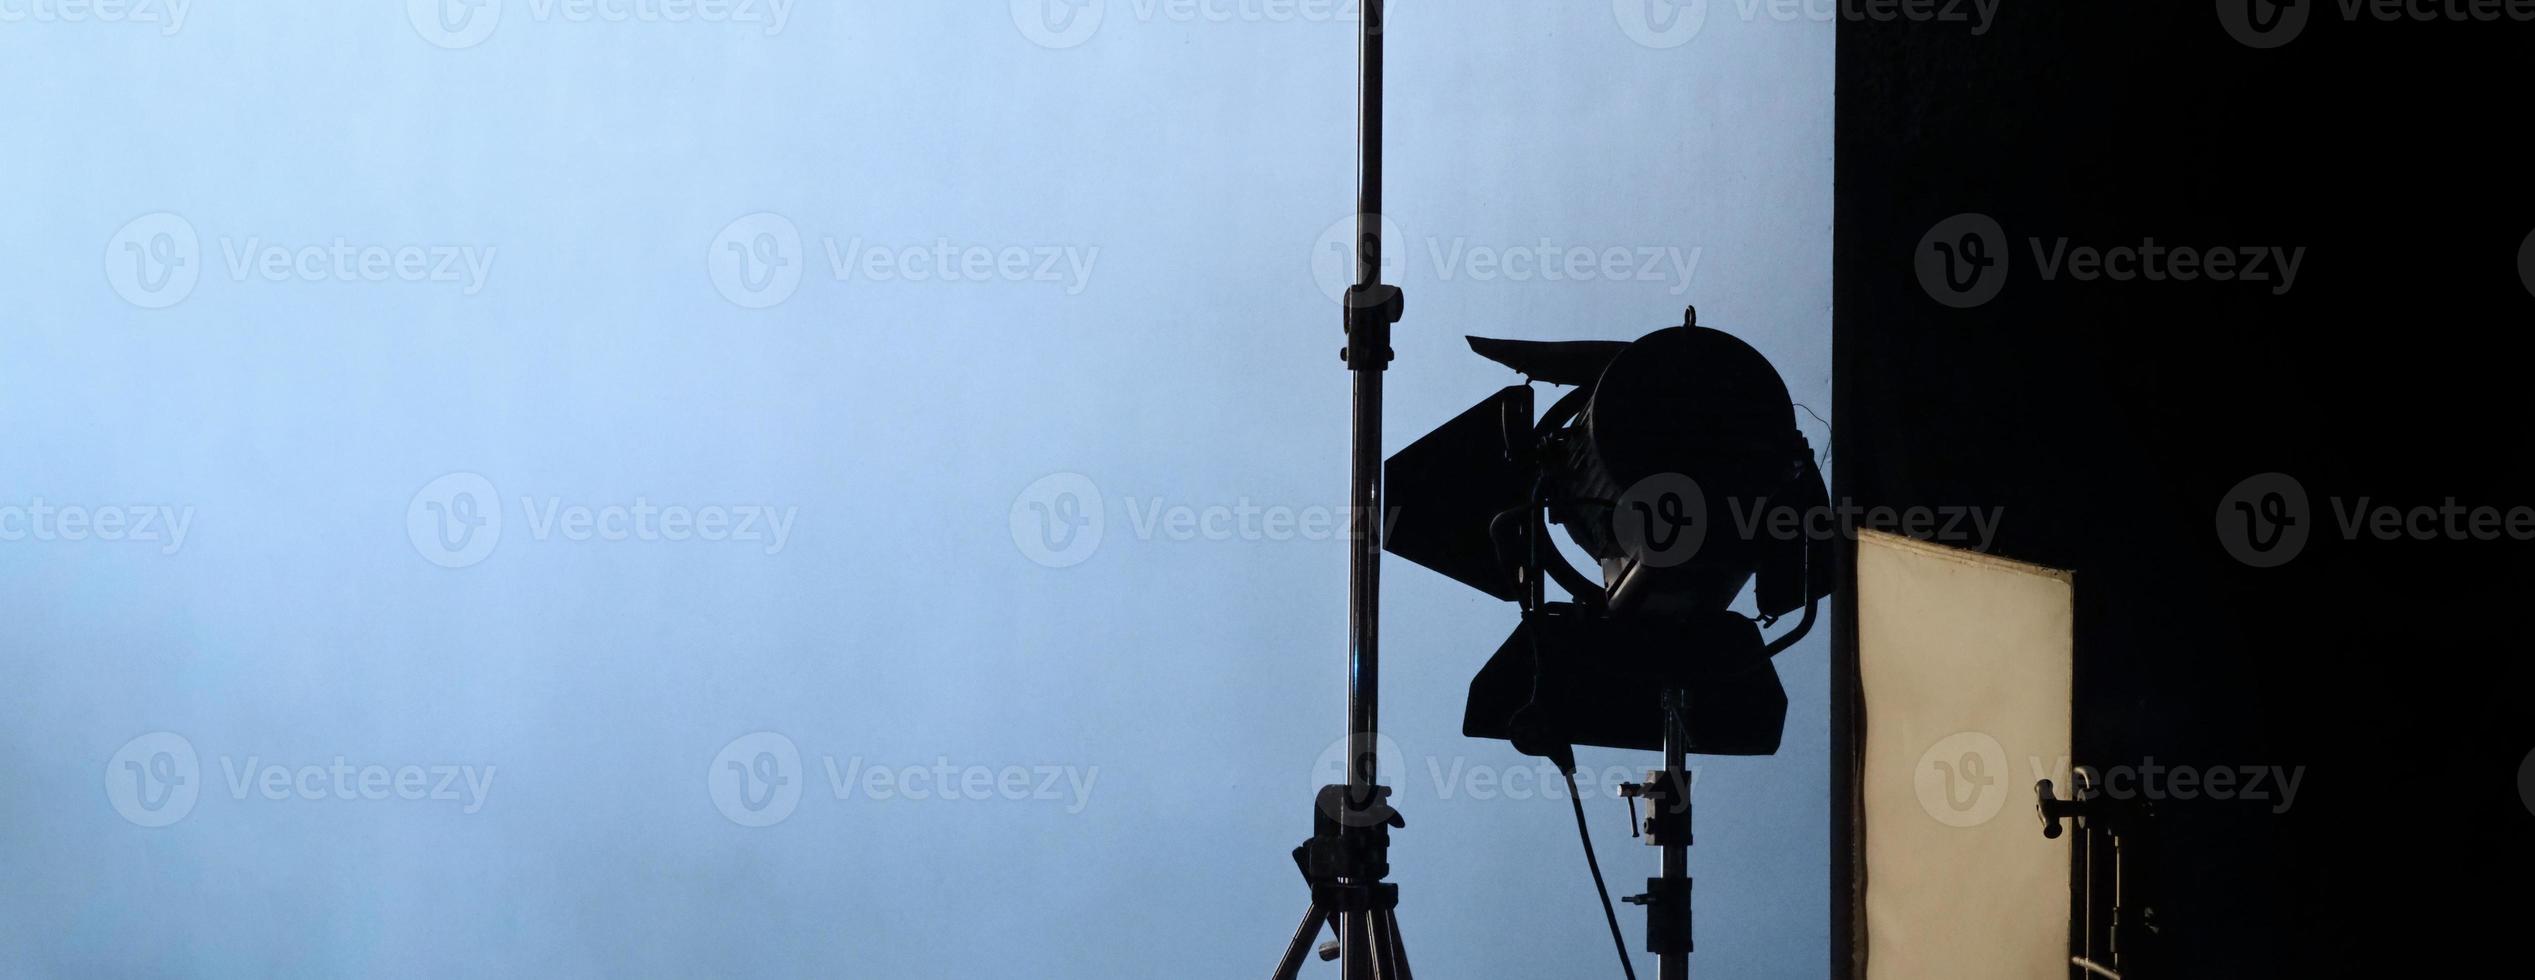 Film light for video production camera in studio set or Use as studio photo shoot light